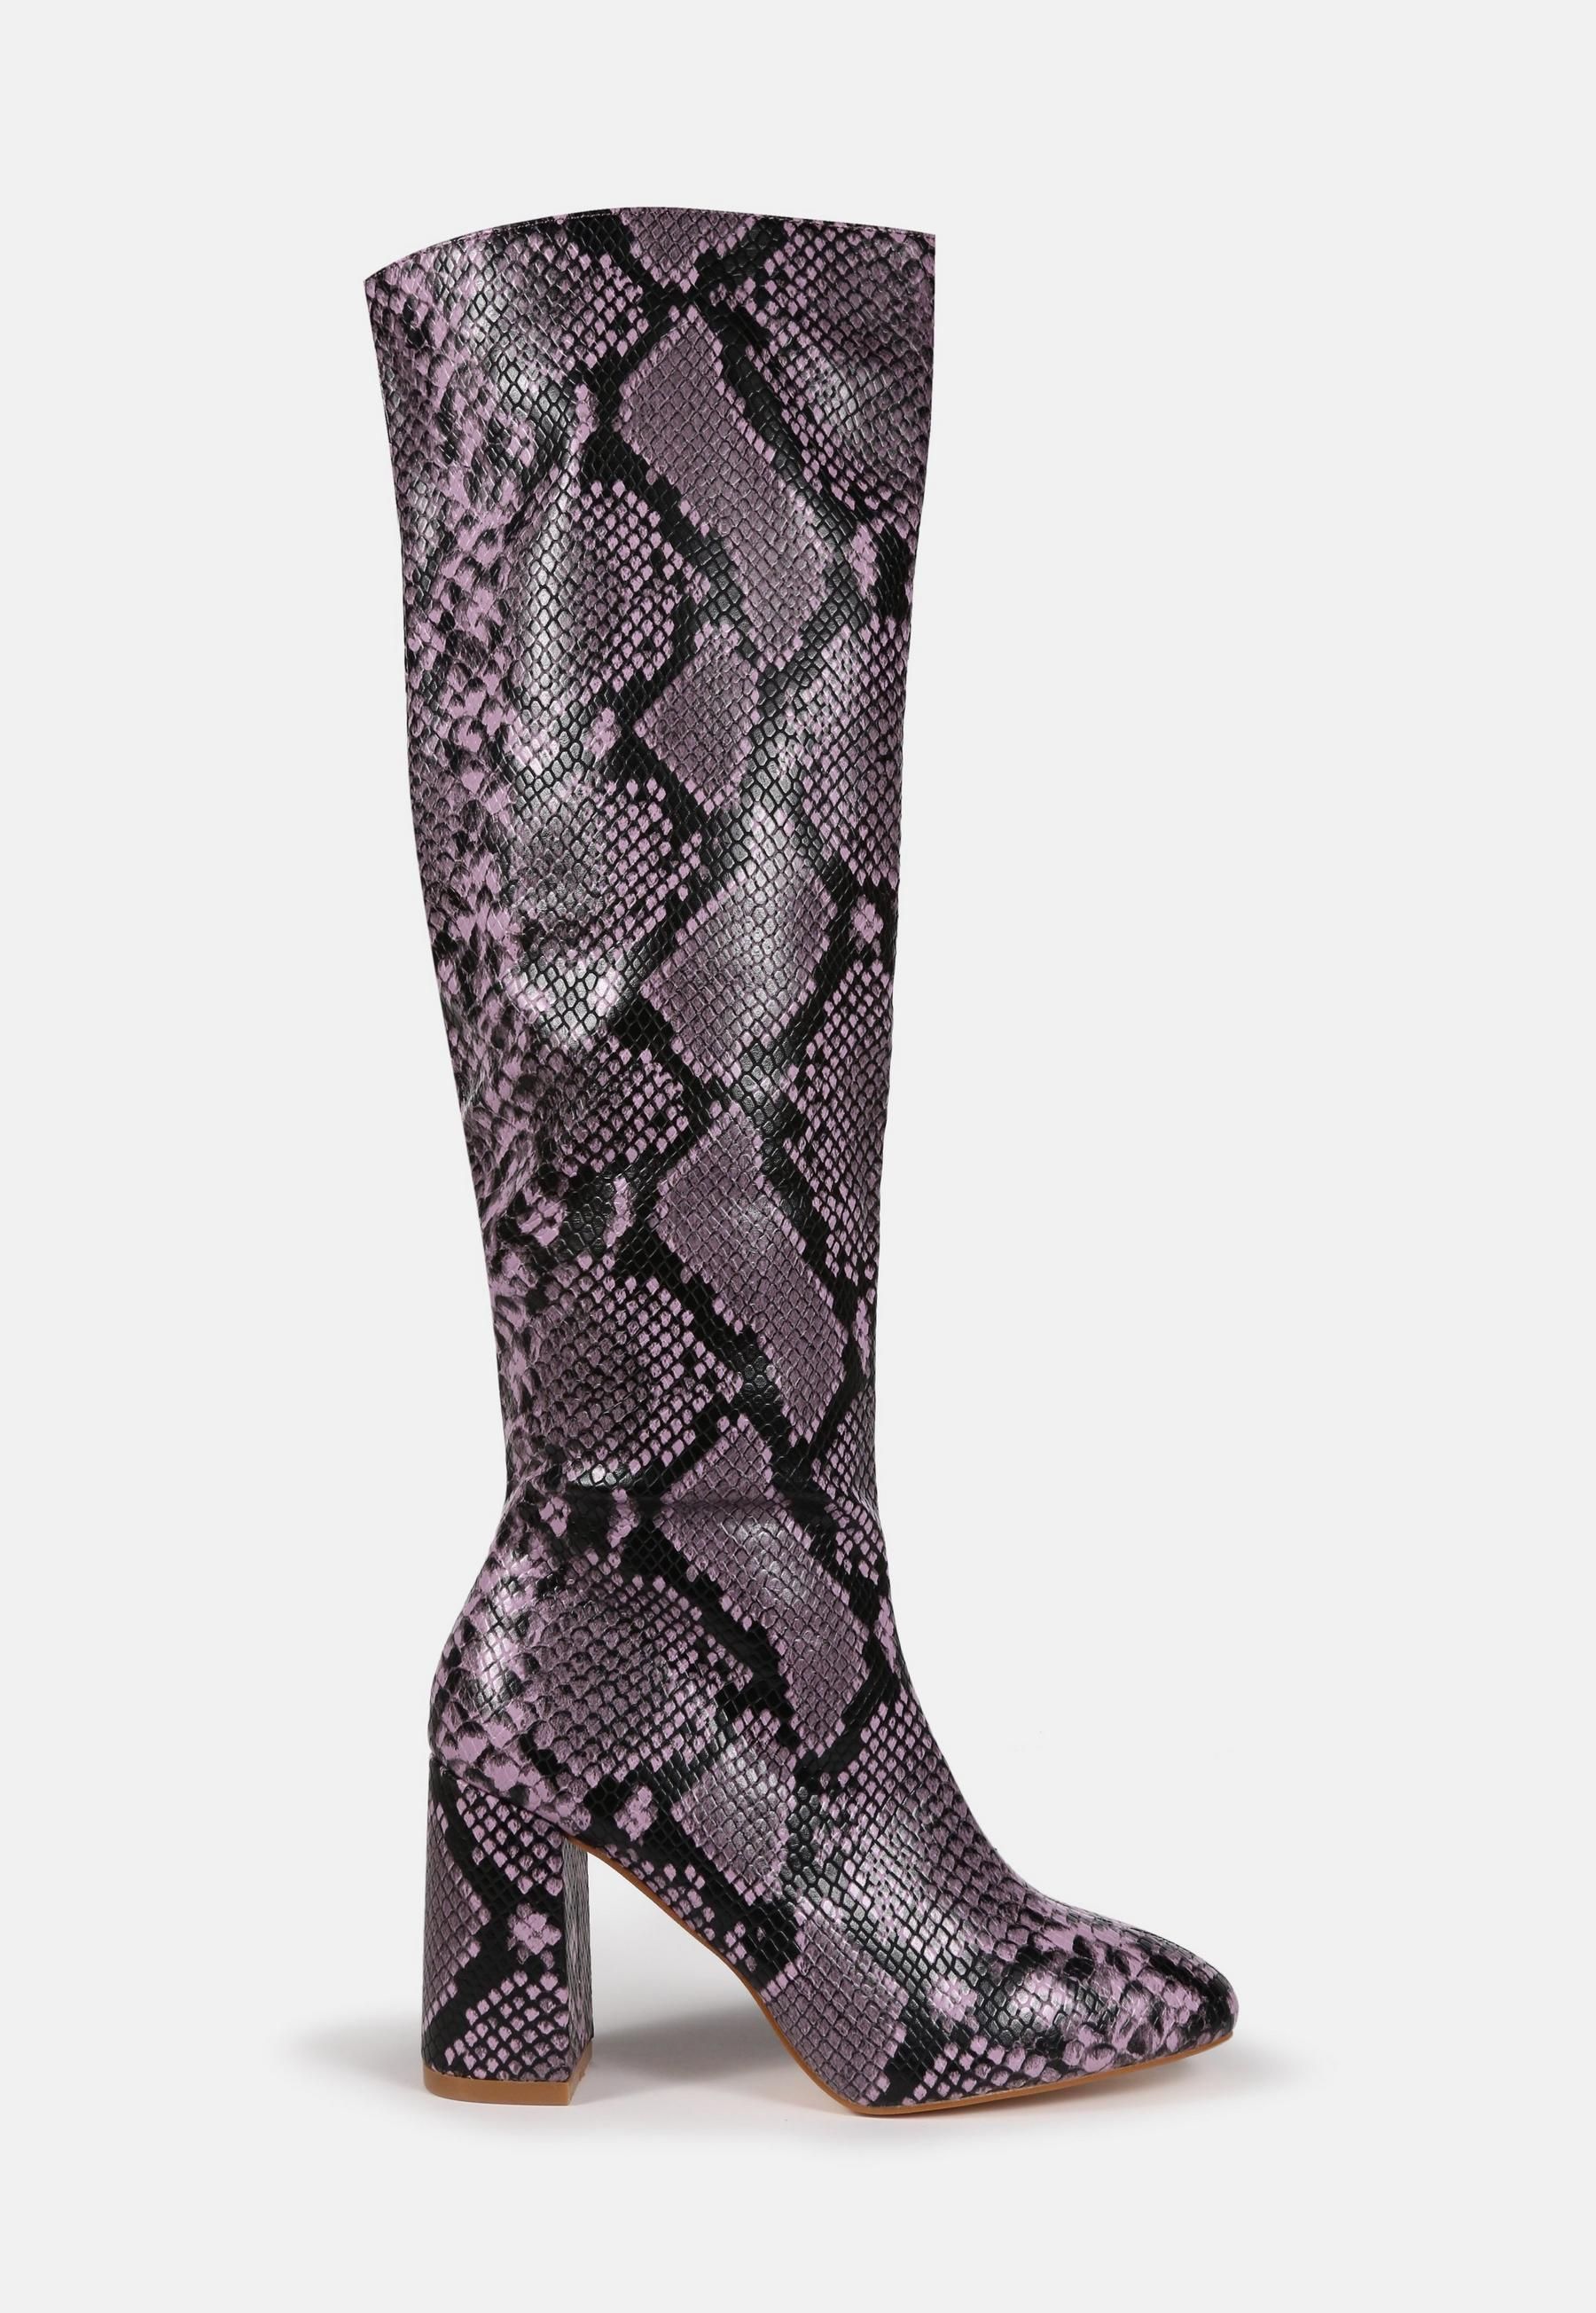 Missguided - Pink Snake Knee High Mid Heel Boots | Missguided (US & CA)